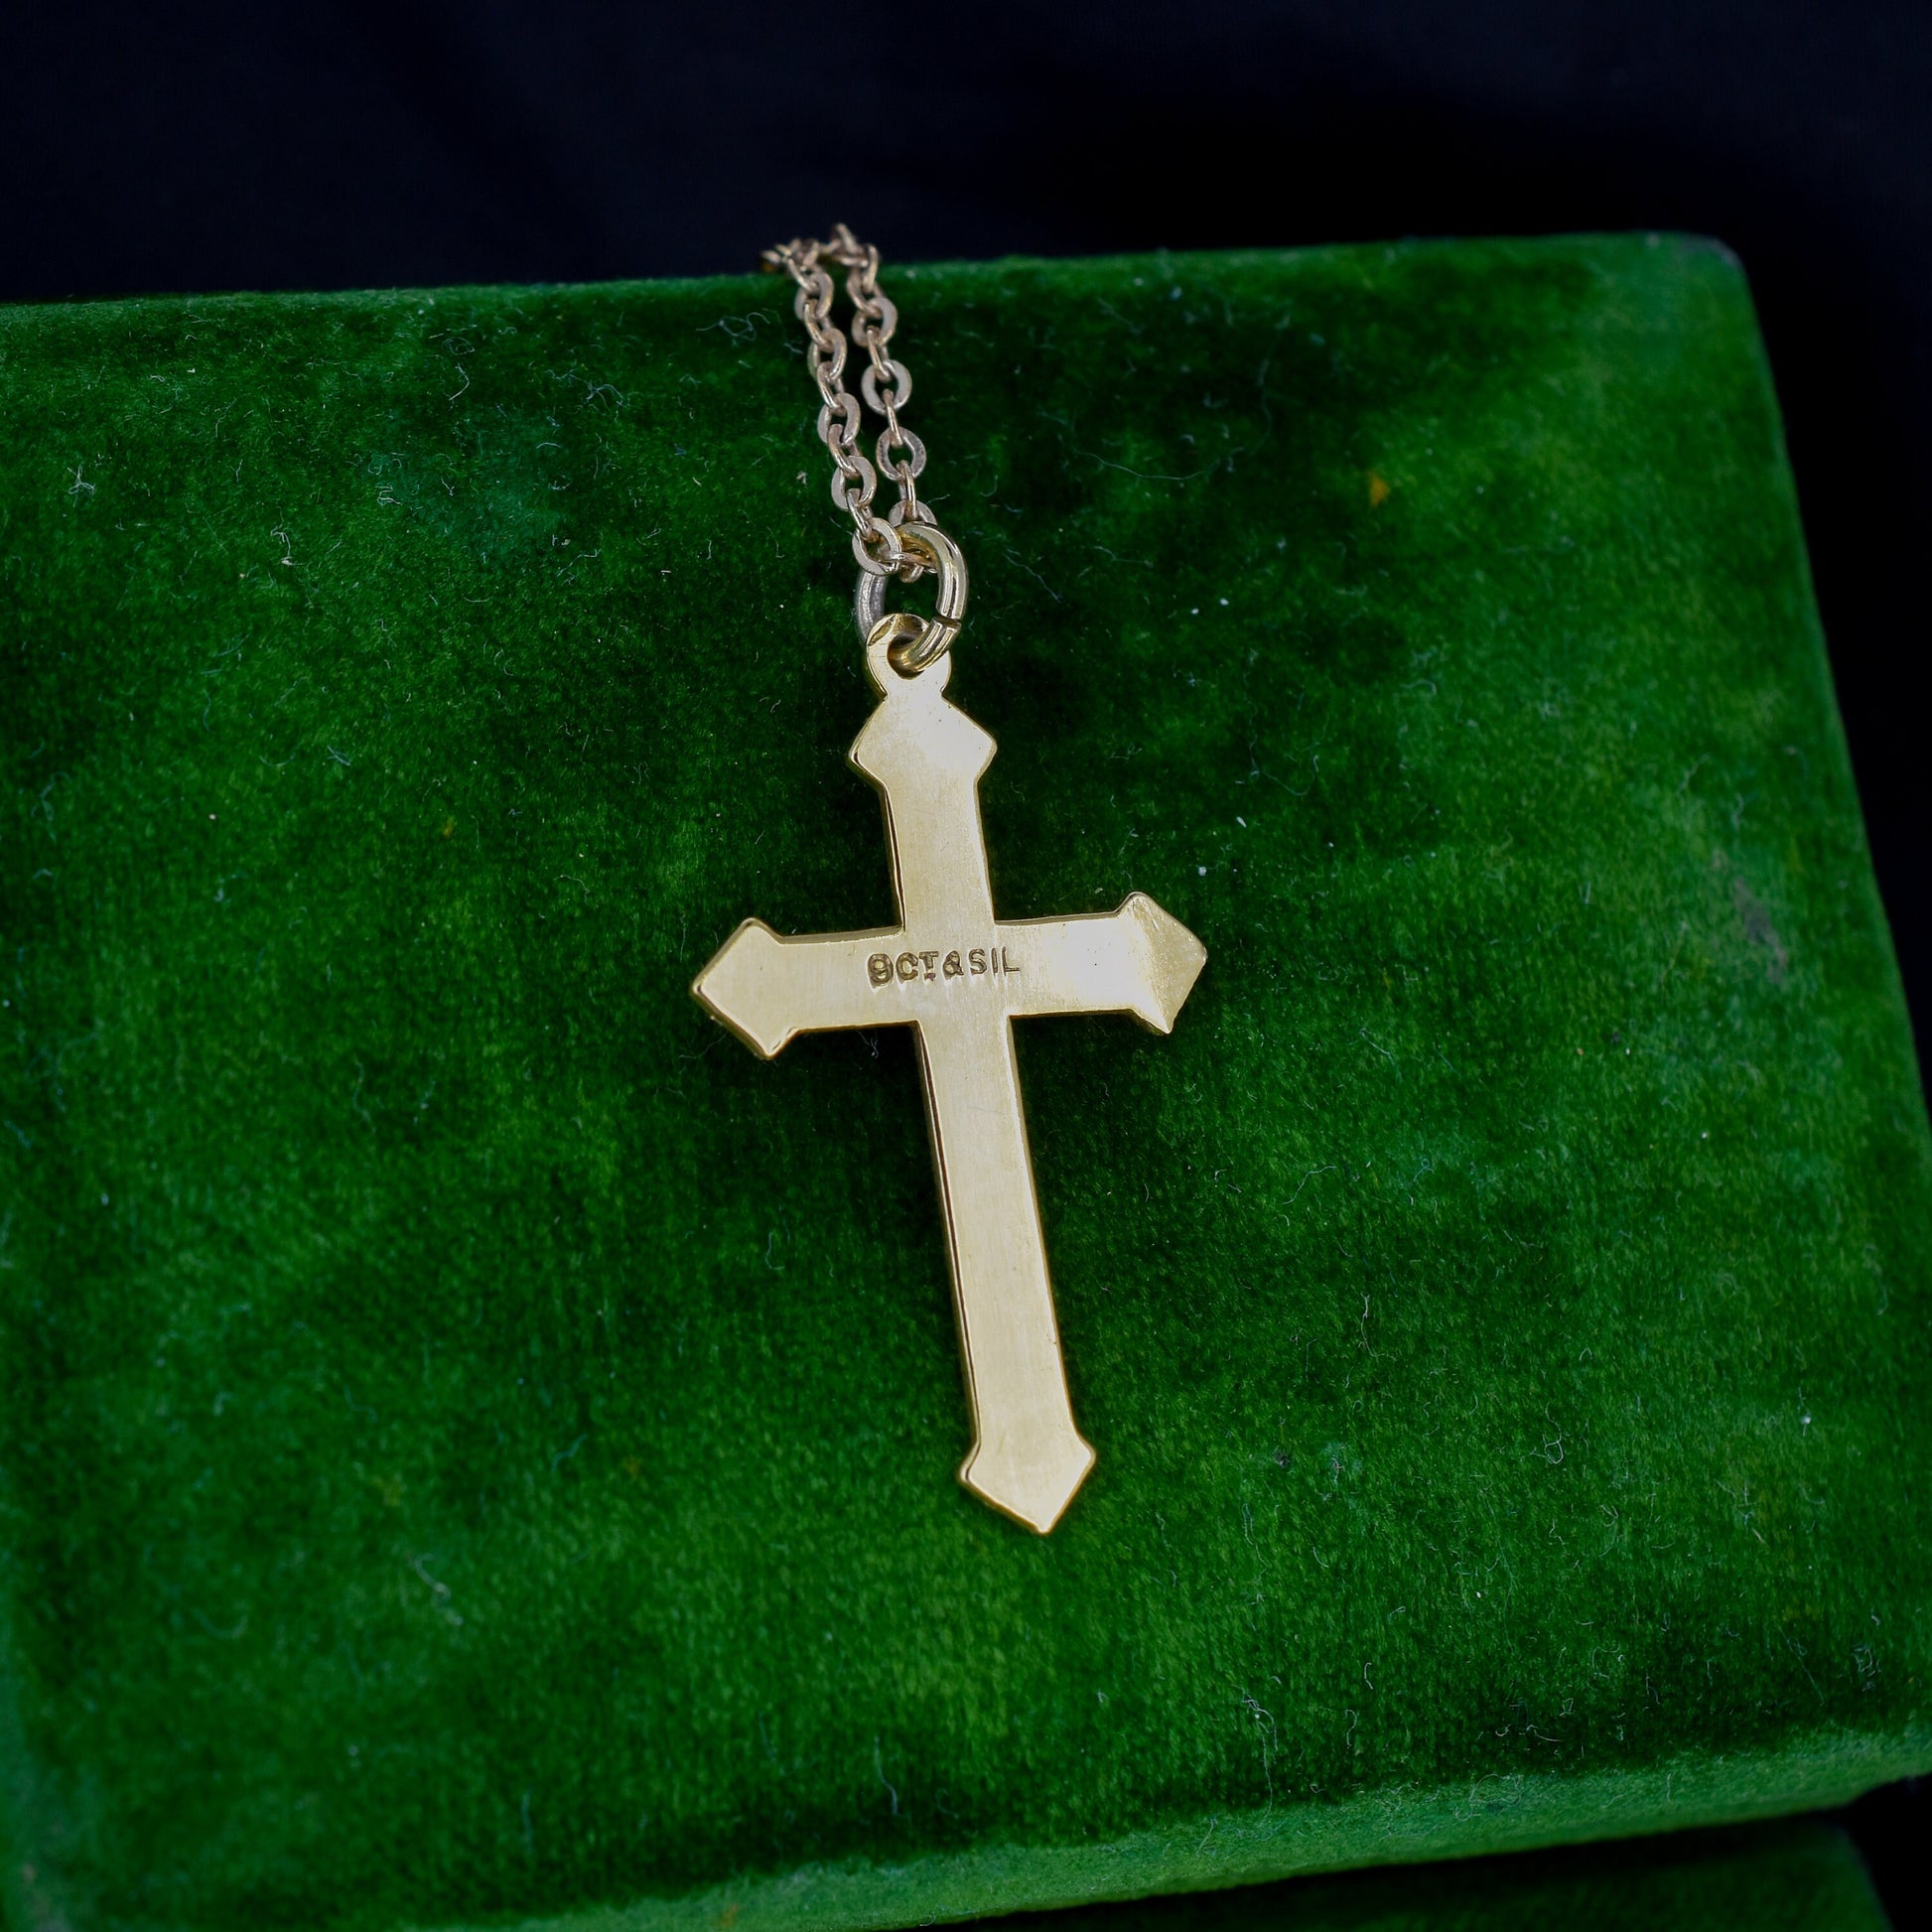 Antique Gold on Silver Cross Pendant and Chain Necklace